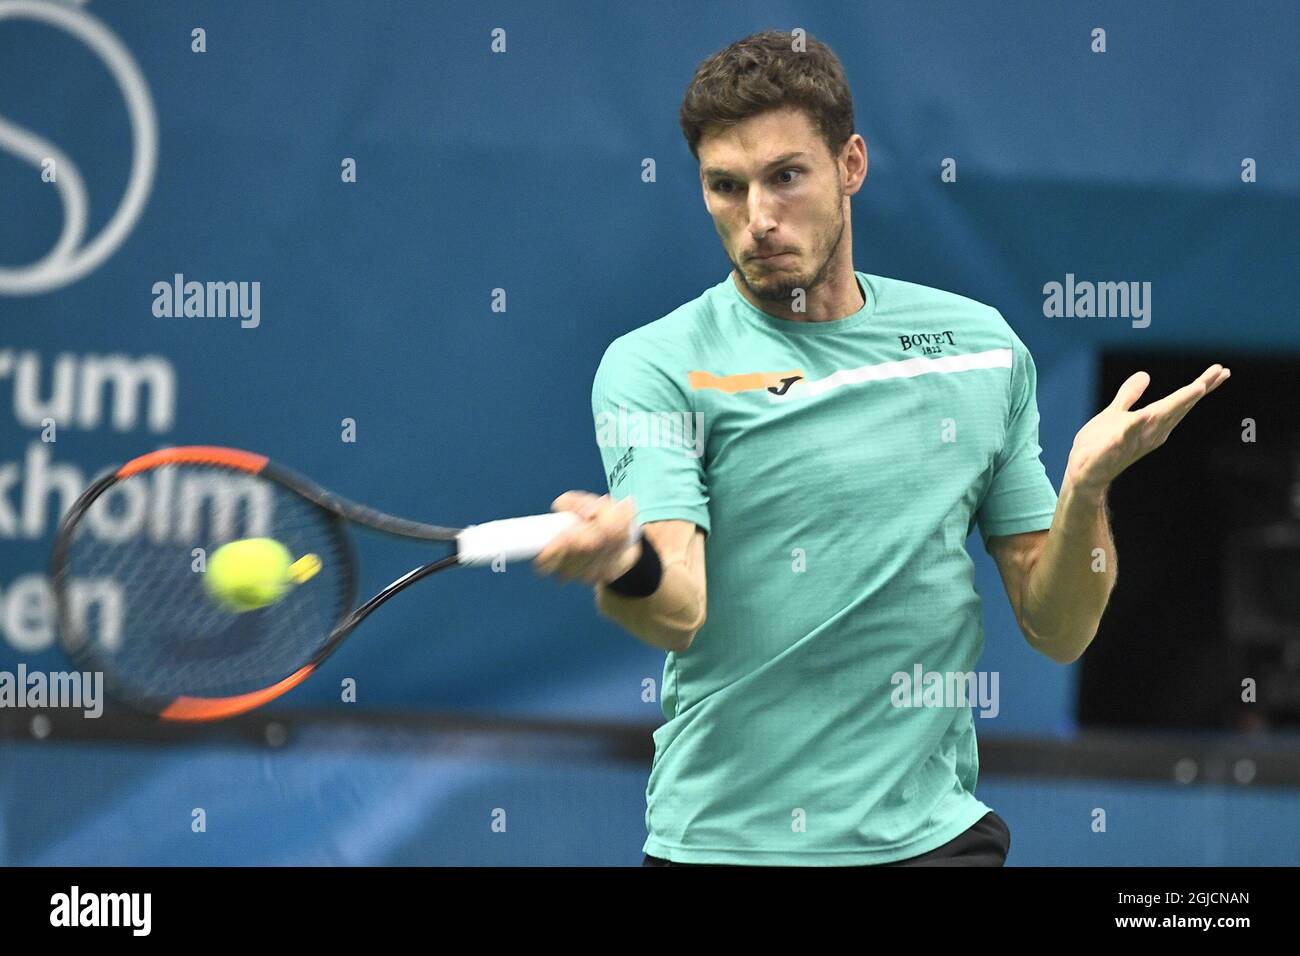 Pablo Carreno Busta (ESP) during the men's single semi finals at the ATP Stockholm Open tennis tournament at the Royal Tennis Hall in Stockholm, Sweden, October 19 2018, Photo: Claudio Bresciani / TT code 10090  Stock Photo